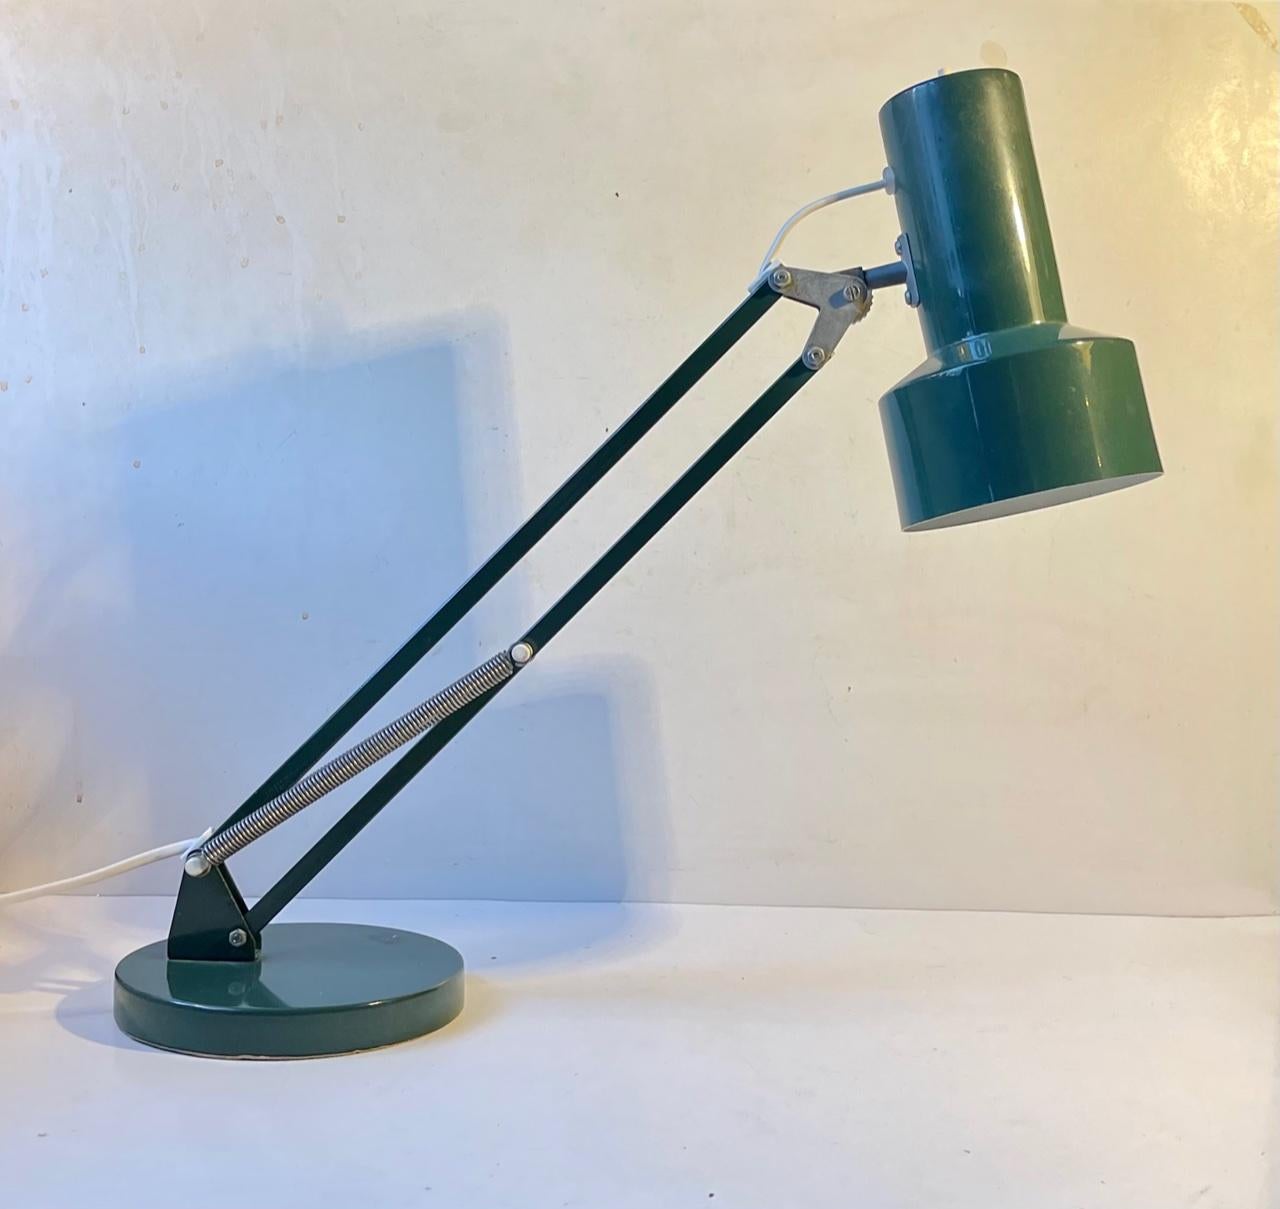 A rare teal green table lamp with fully adjustable stem and shade. In Denmark we call these architect table lamps due to their multi-functionality. It is made from powder coated aluminum and steel and is inspired by the English Anglepoise desk lamp